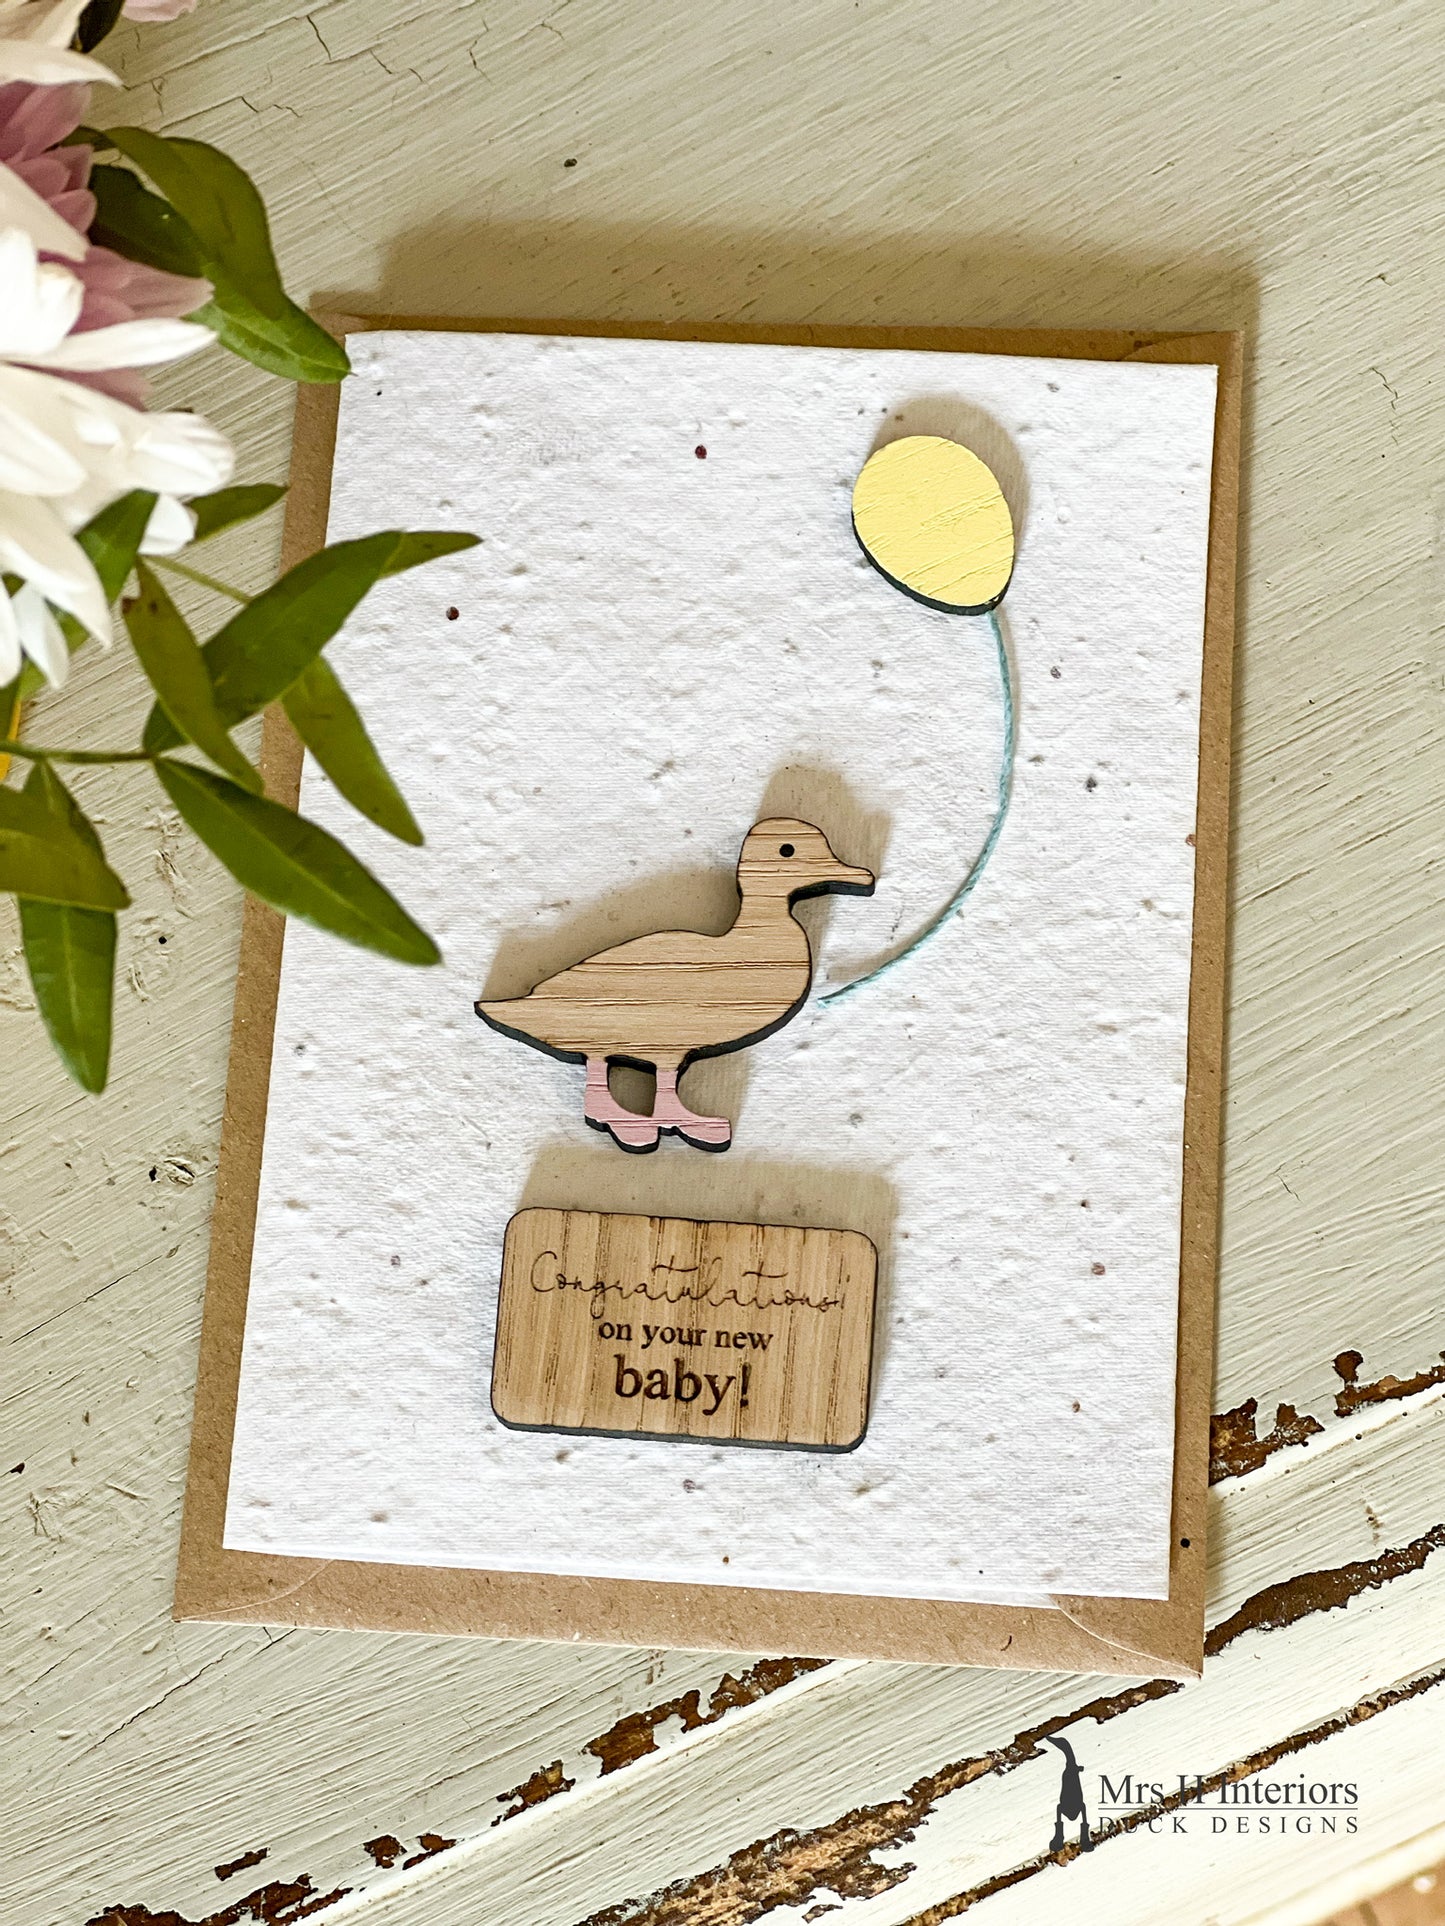 Congratulations New Baby - Duckling & Balloon - Greetings Card - Decorated Wooden Duck in Boots by Mrs H the Duck Lady